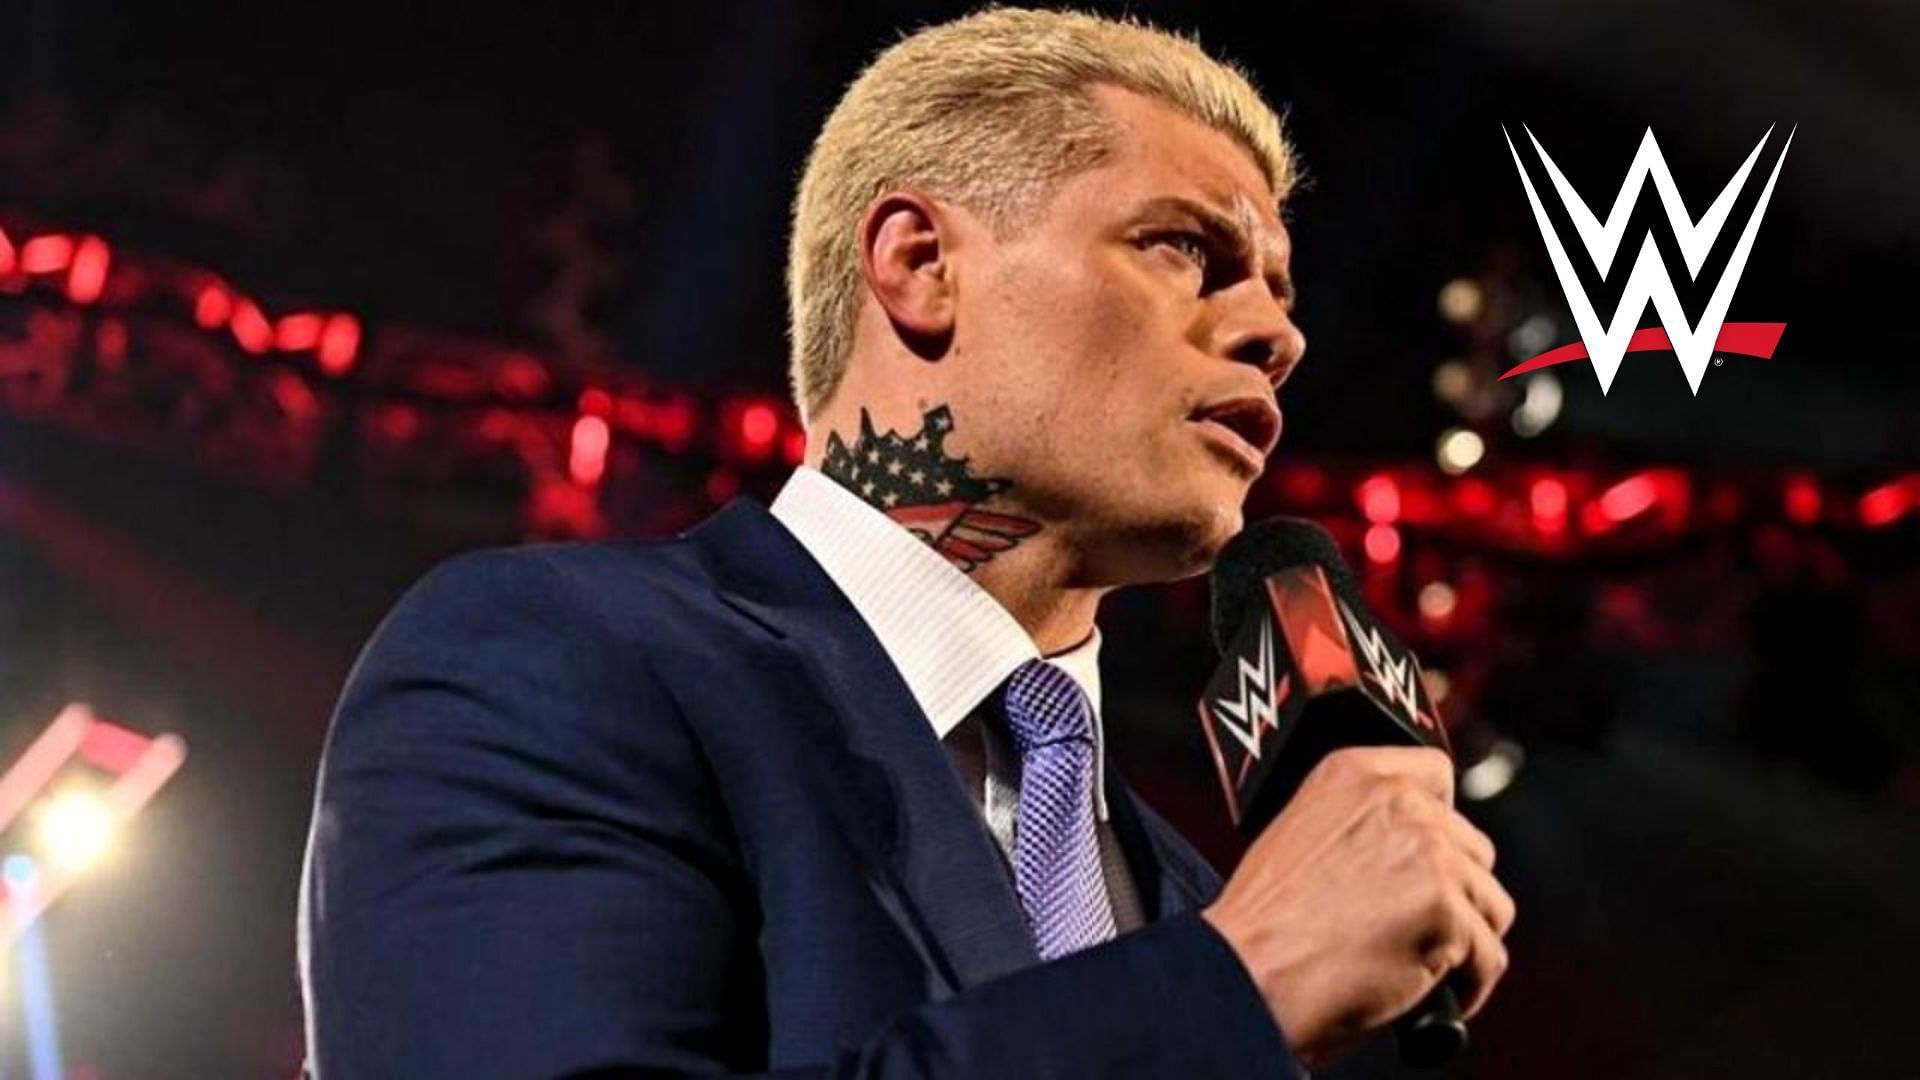 WWE Superstar Cody Rhodes returned after nearly six years